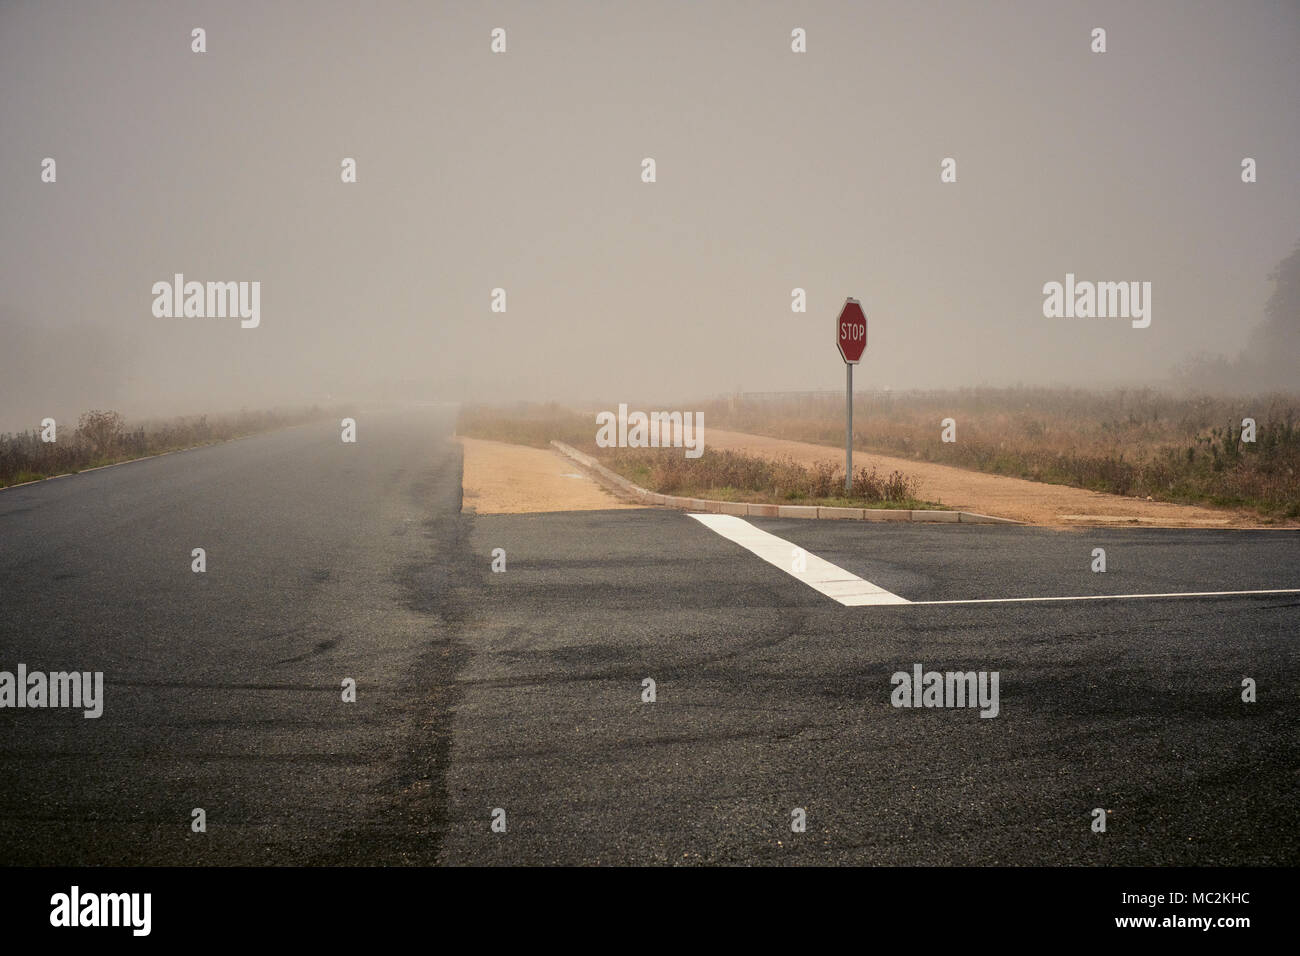 An empty road junction in a foggy landscape Stock Photo